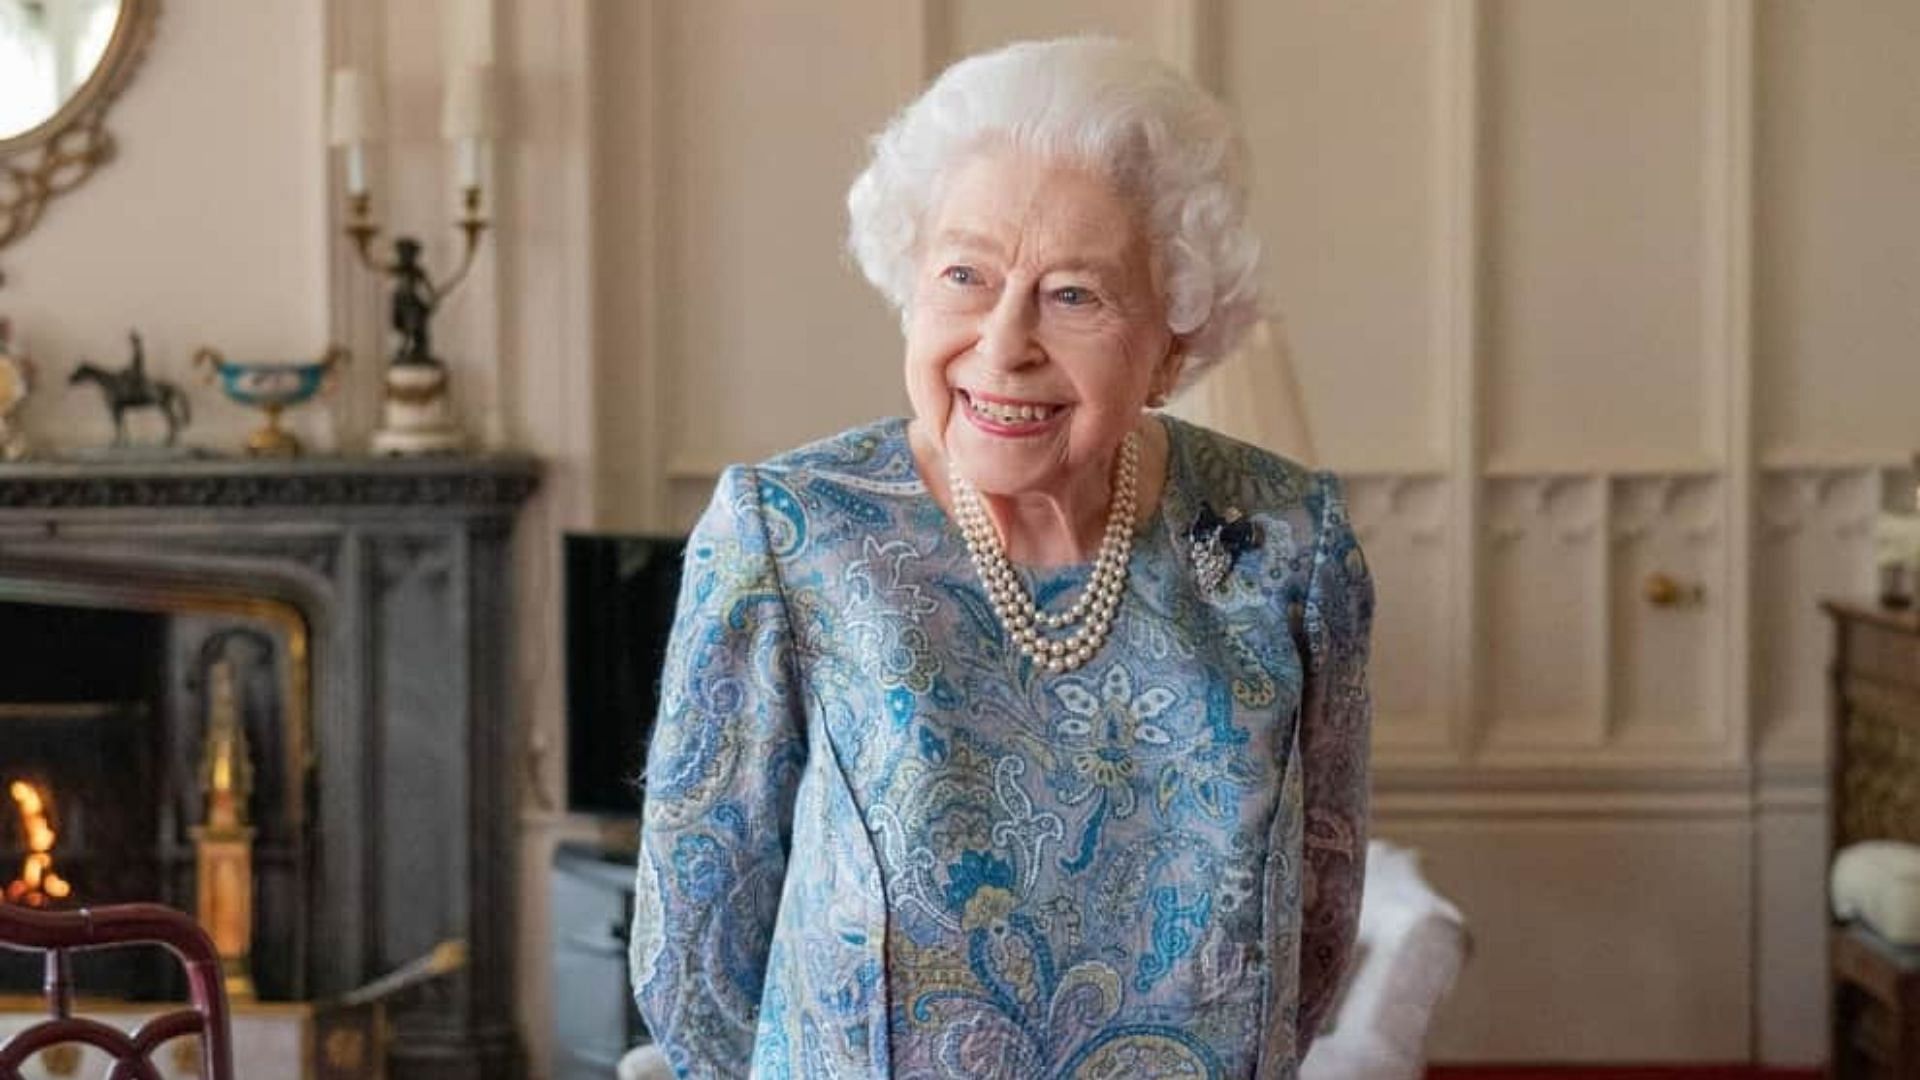 Buckingham Palace issues a statement on Queen Elizabeth